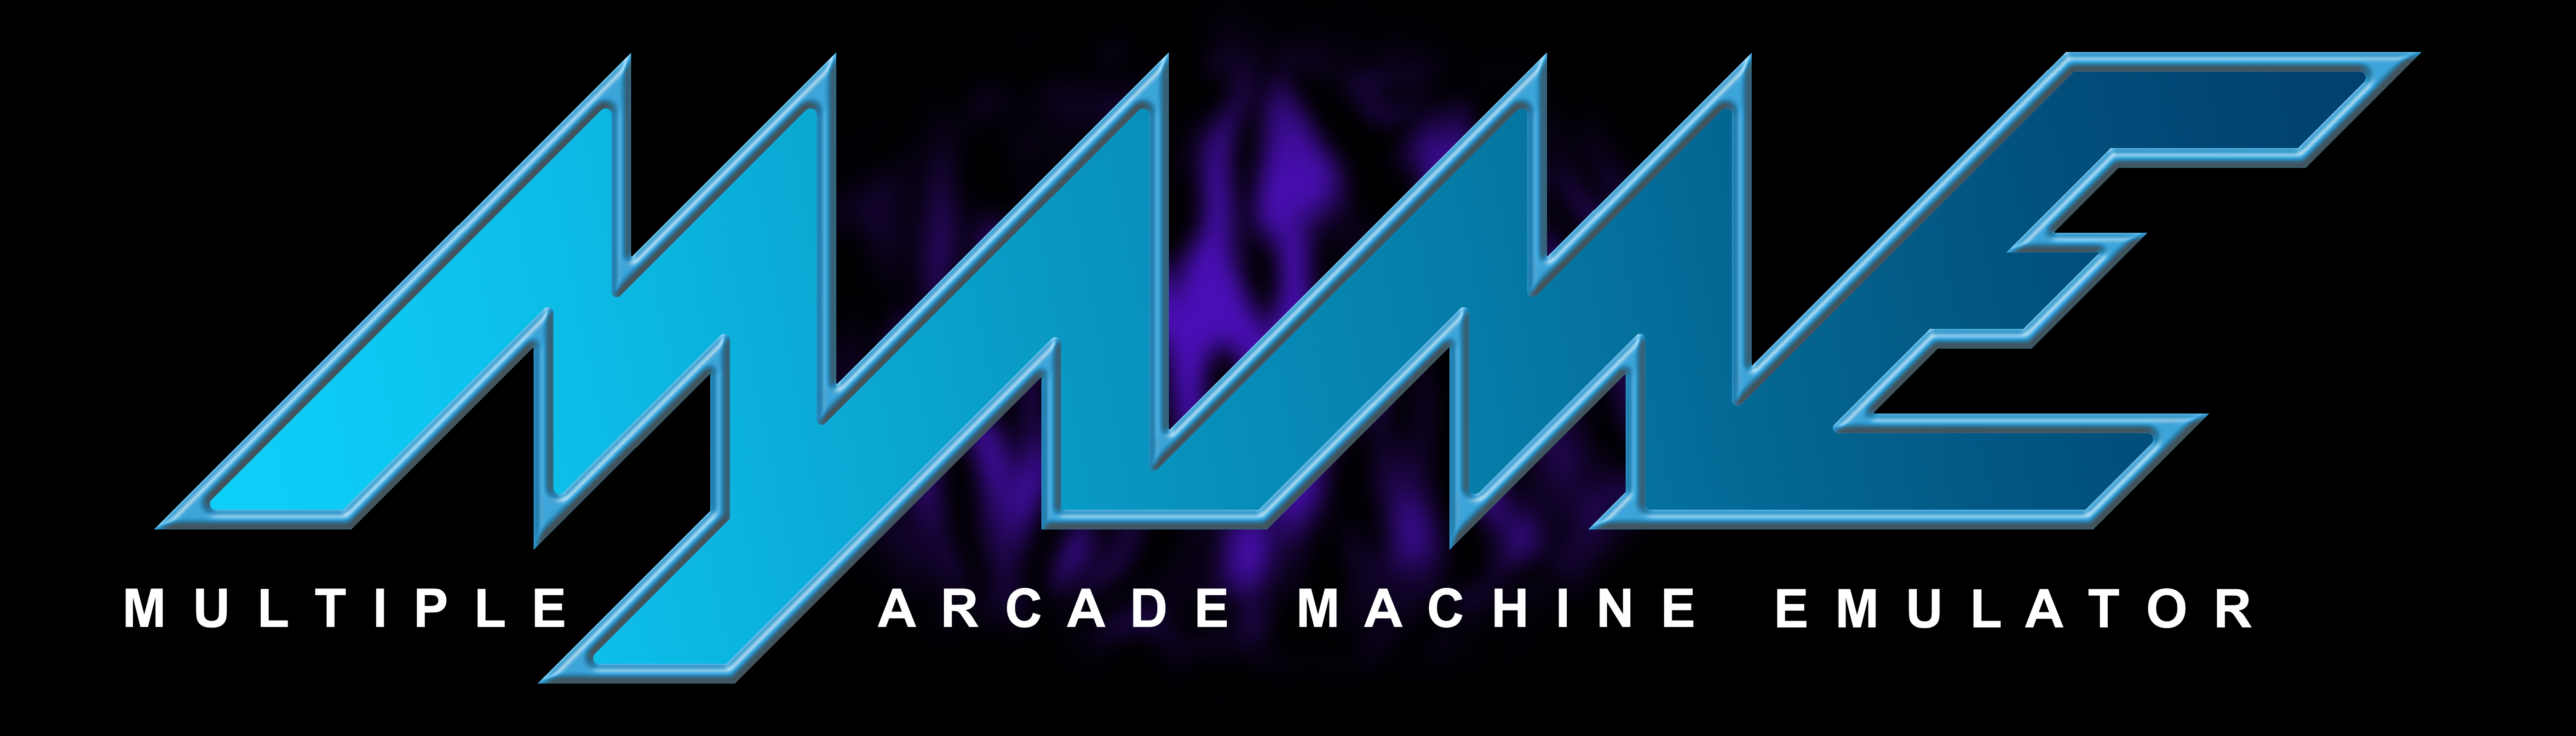 Oscars Custom Mame Logo The Familiar Background Flames Replaced By A 5600x1600